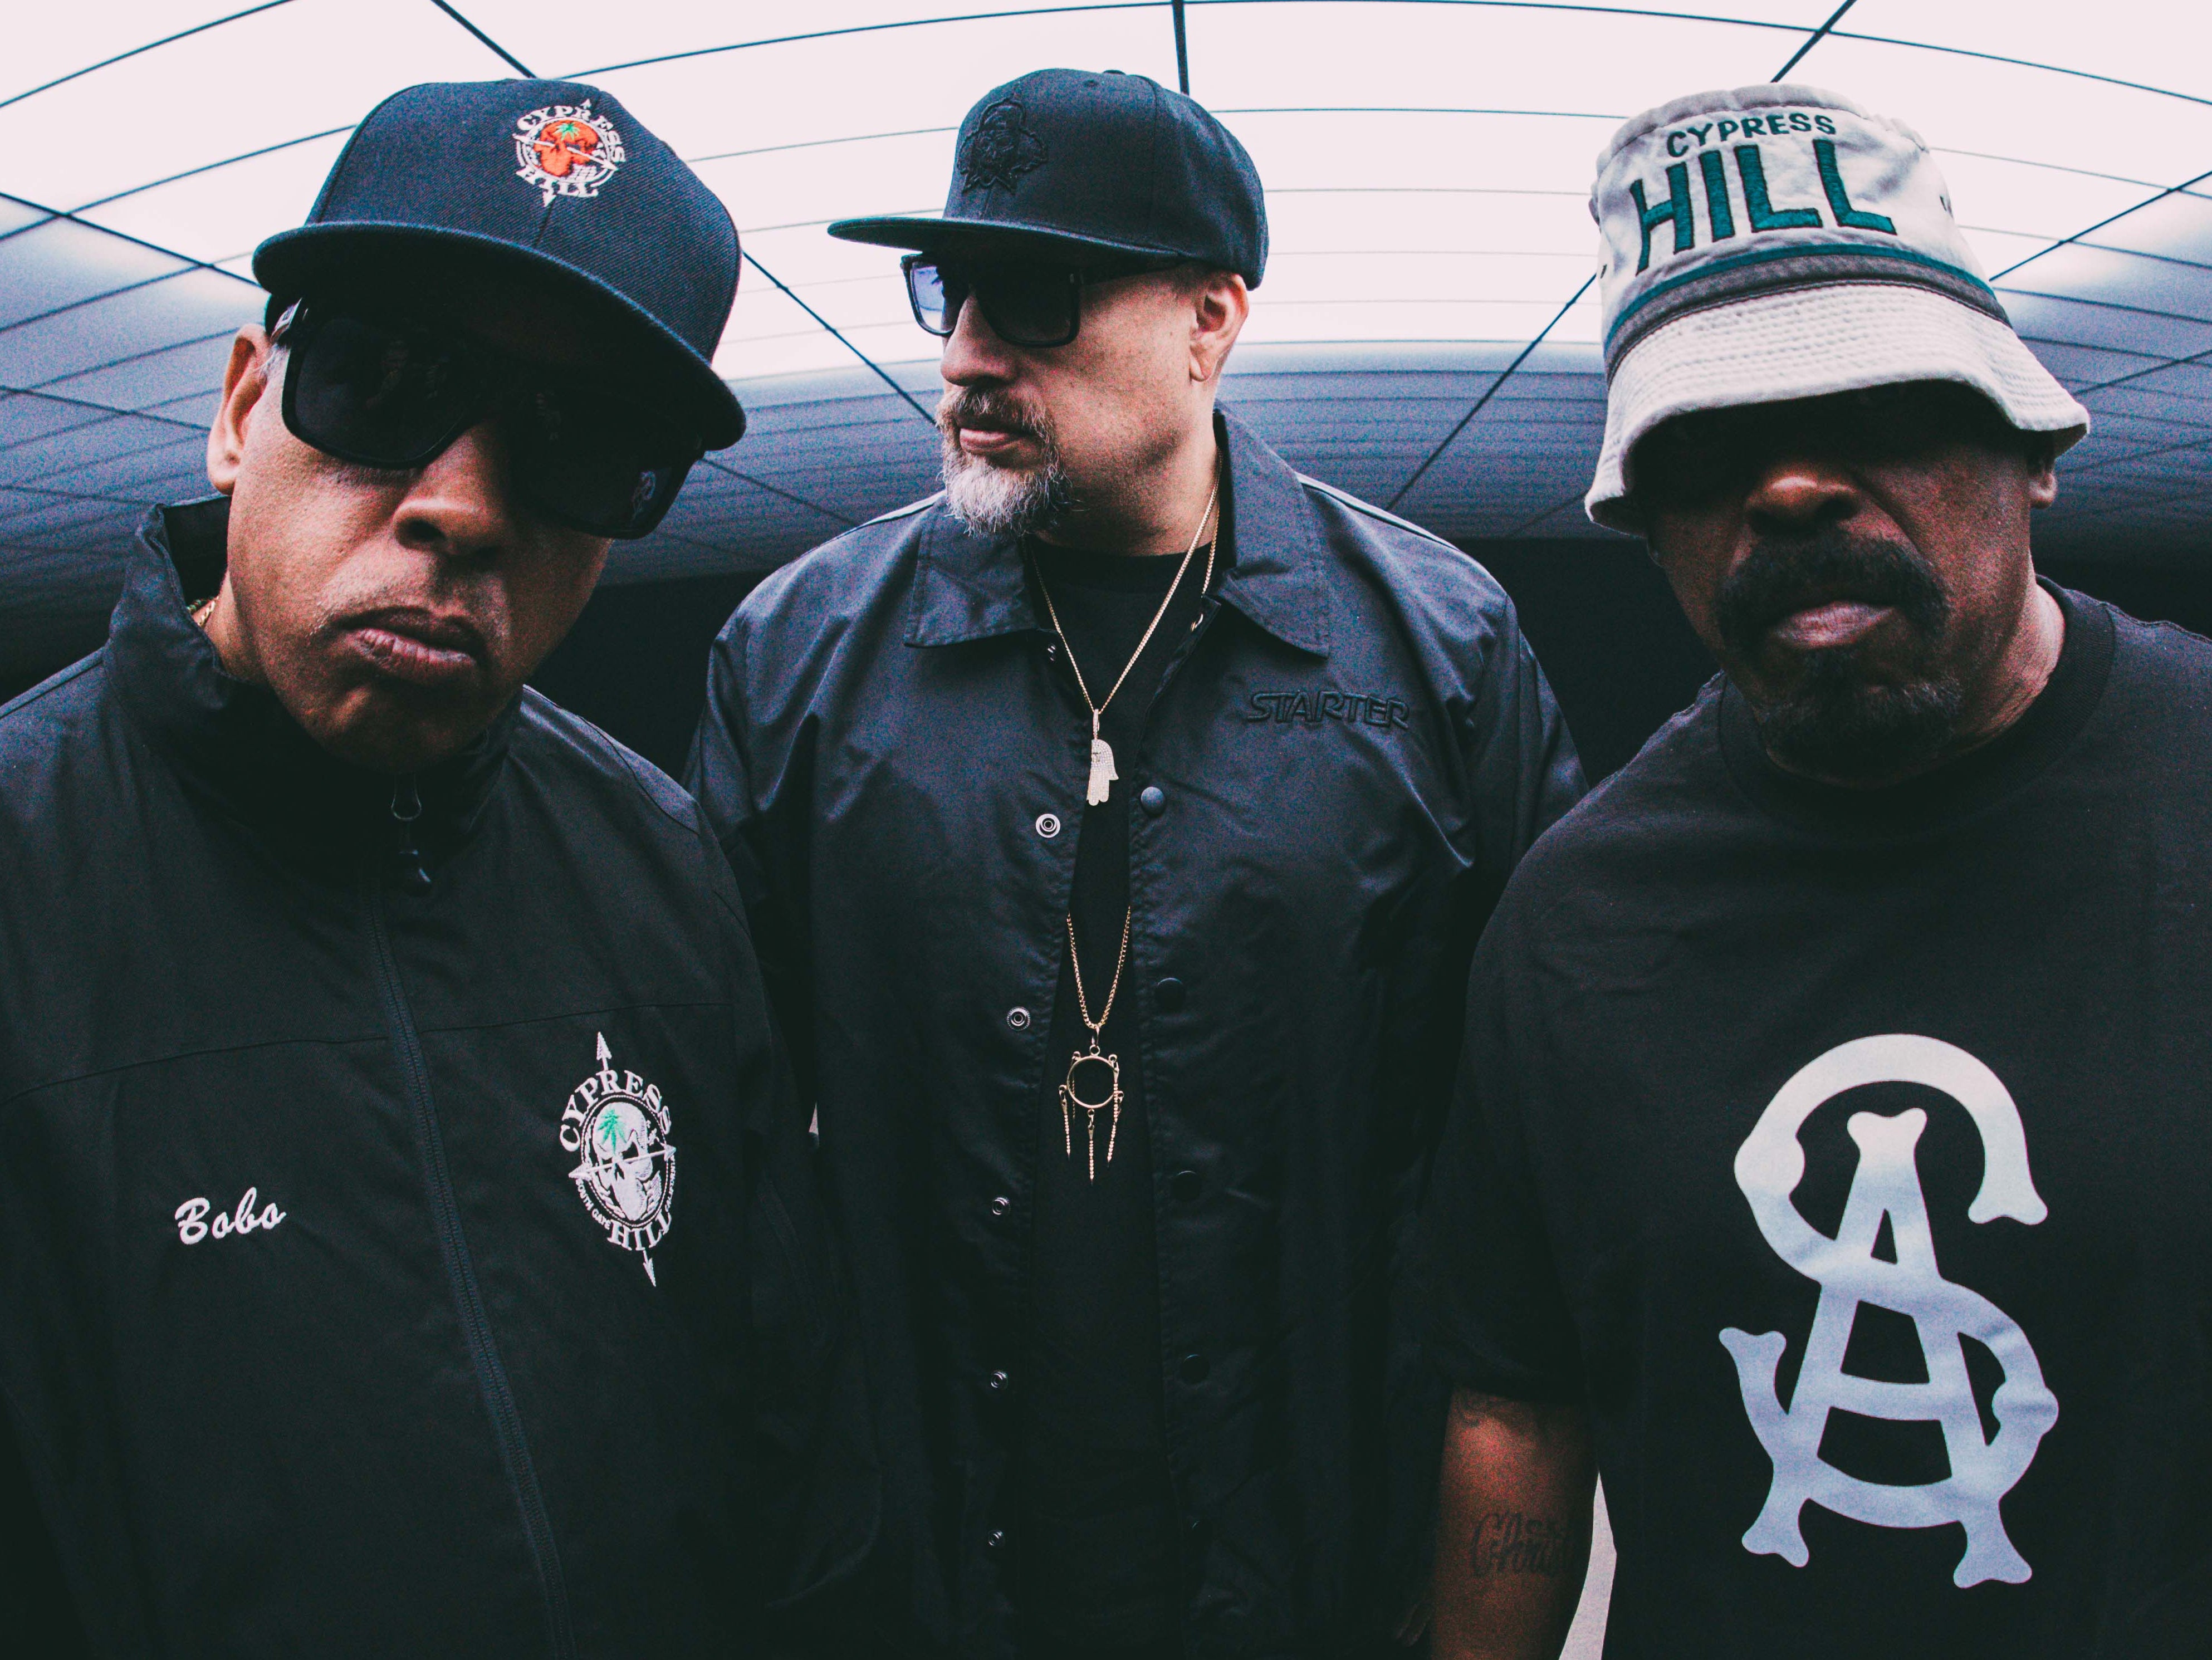 Cypress Hill in 2022: Percussionist Eric Bobo, B-Real and Sen Dog